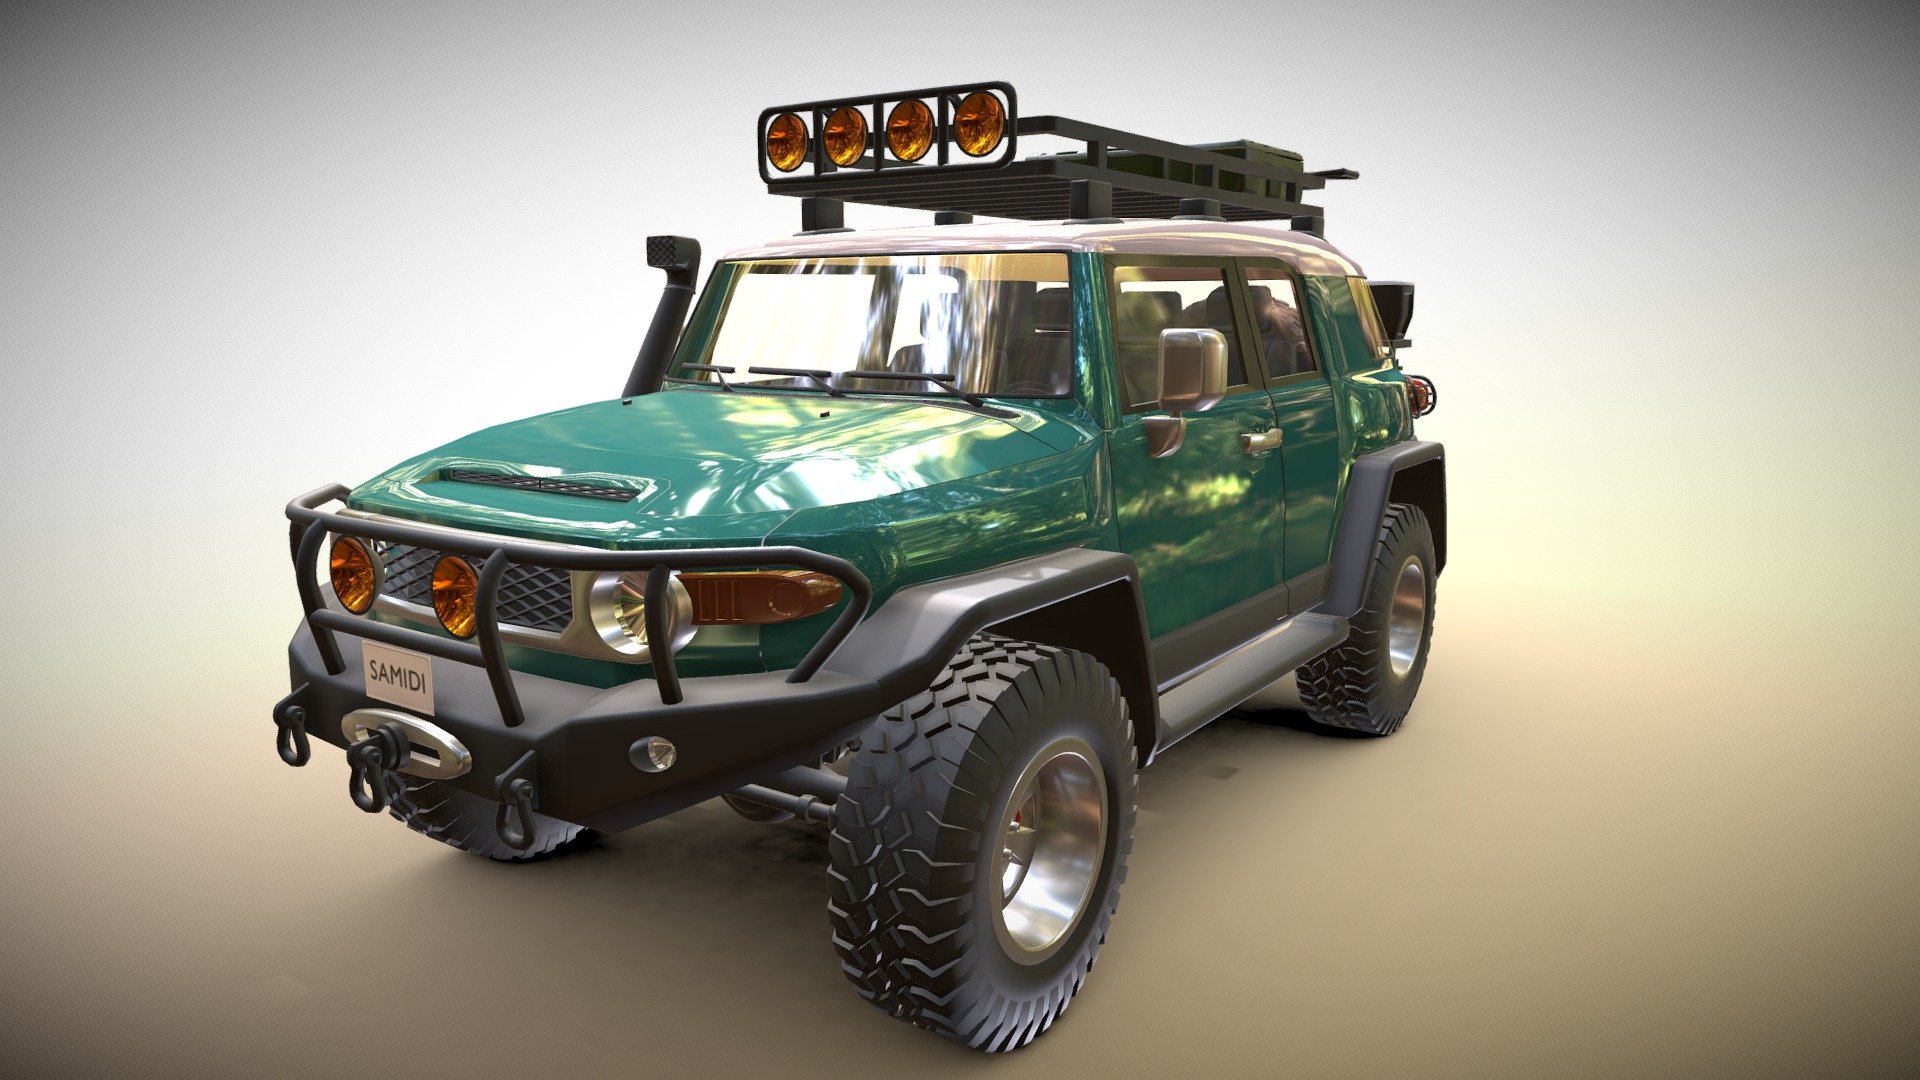 SUV model. Asset ready to use. 4 texture (Interior 3/Number plane 1). Separated steering wheel. Detailed suspension - Toyota FJ cruiser Offroad - 3D model by Samidi (@cachetf) 3d model